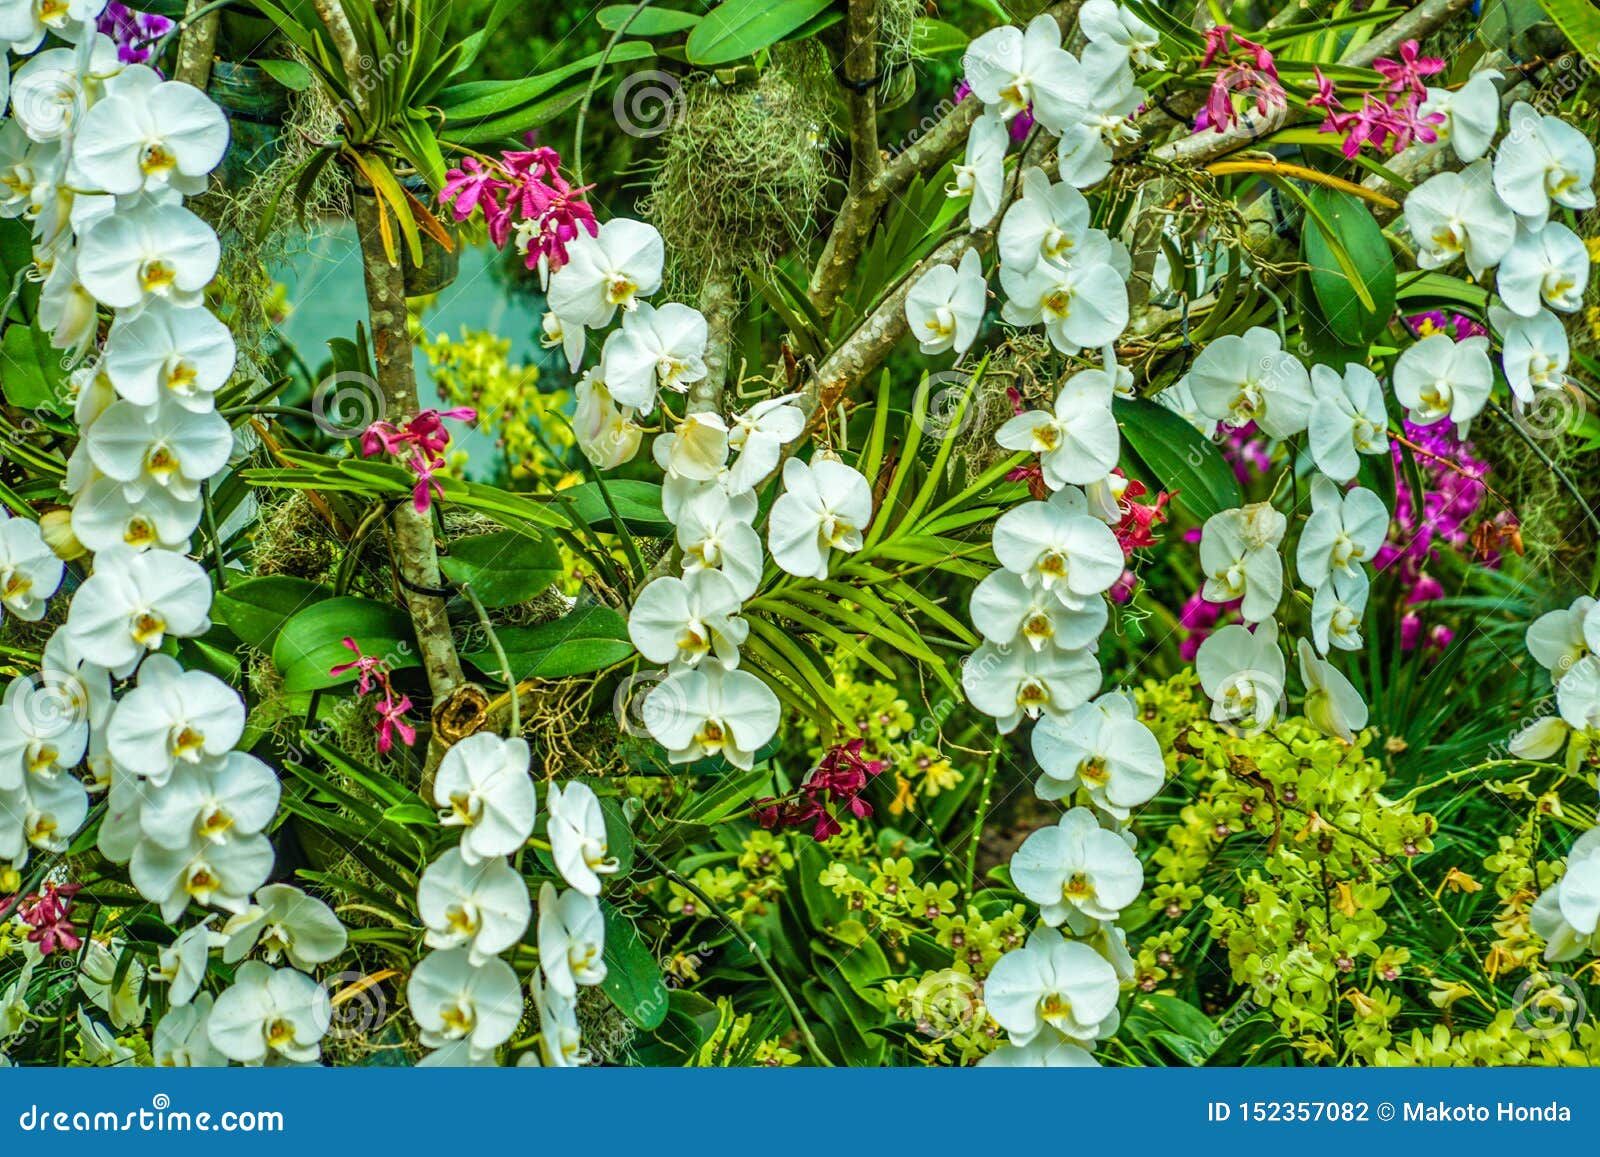 Flora of the Tropical Jungle Stock Photo - Image of plant, outdoor:  152357082